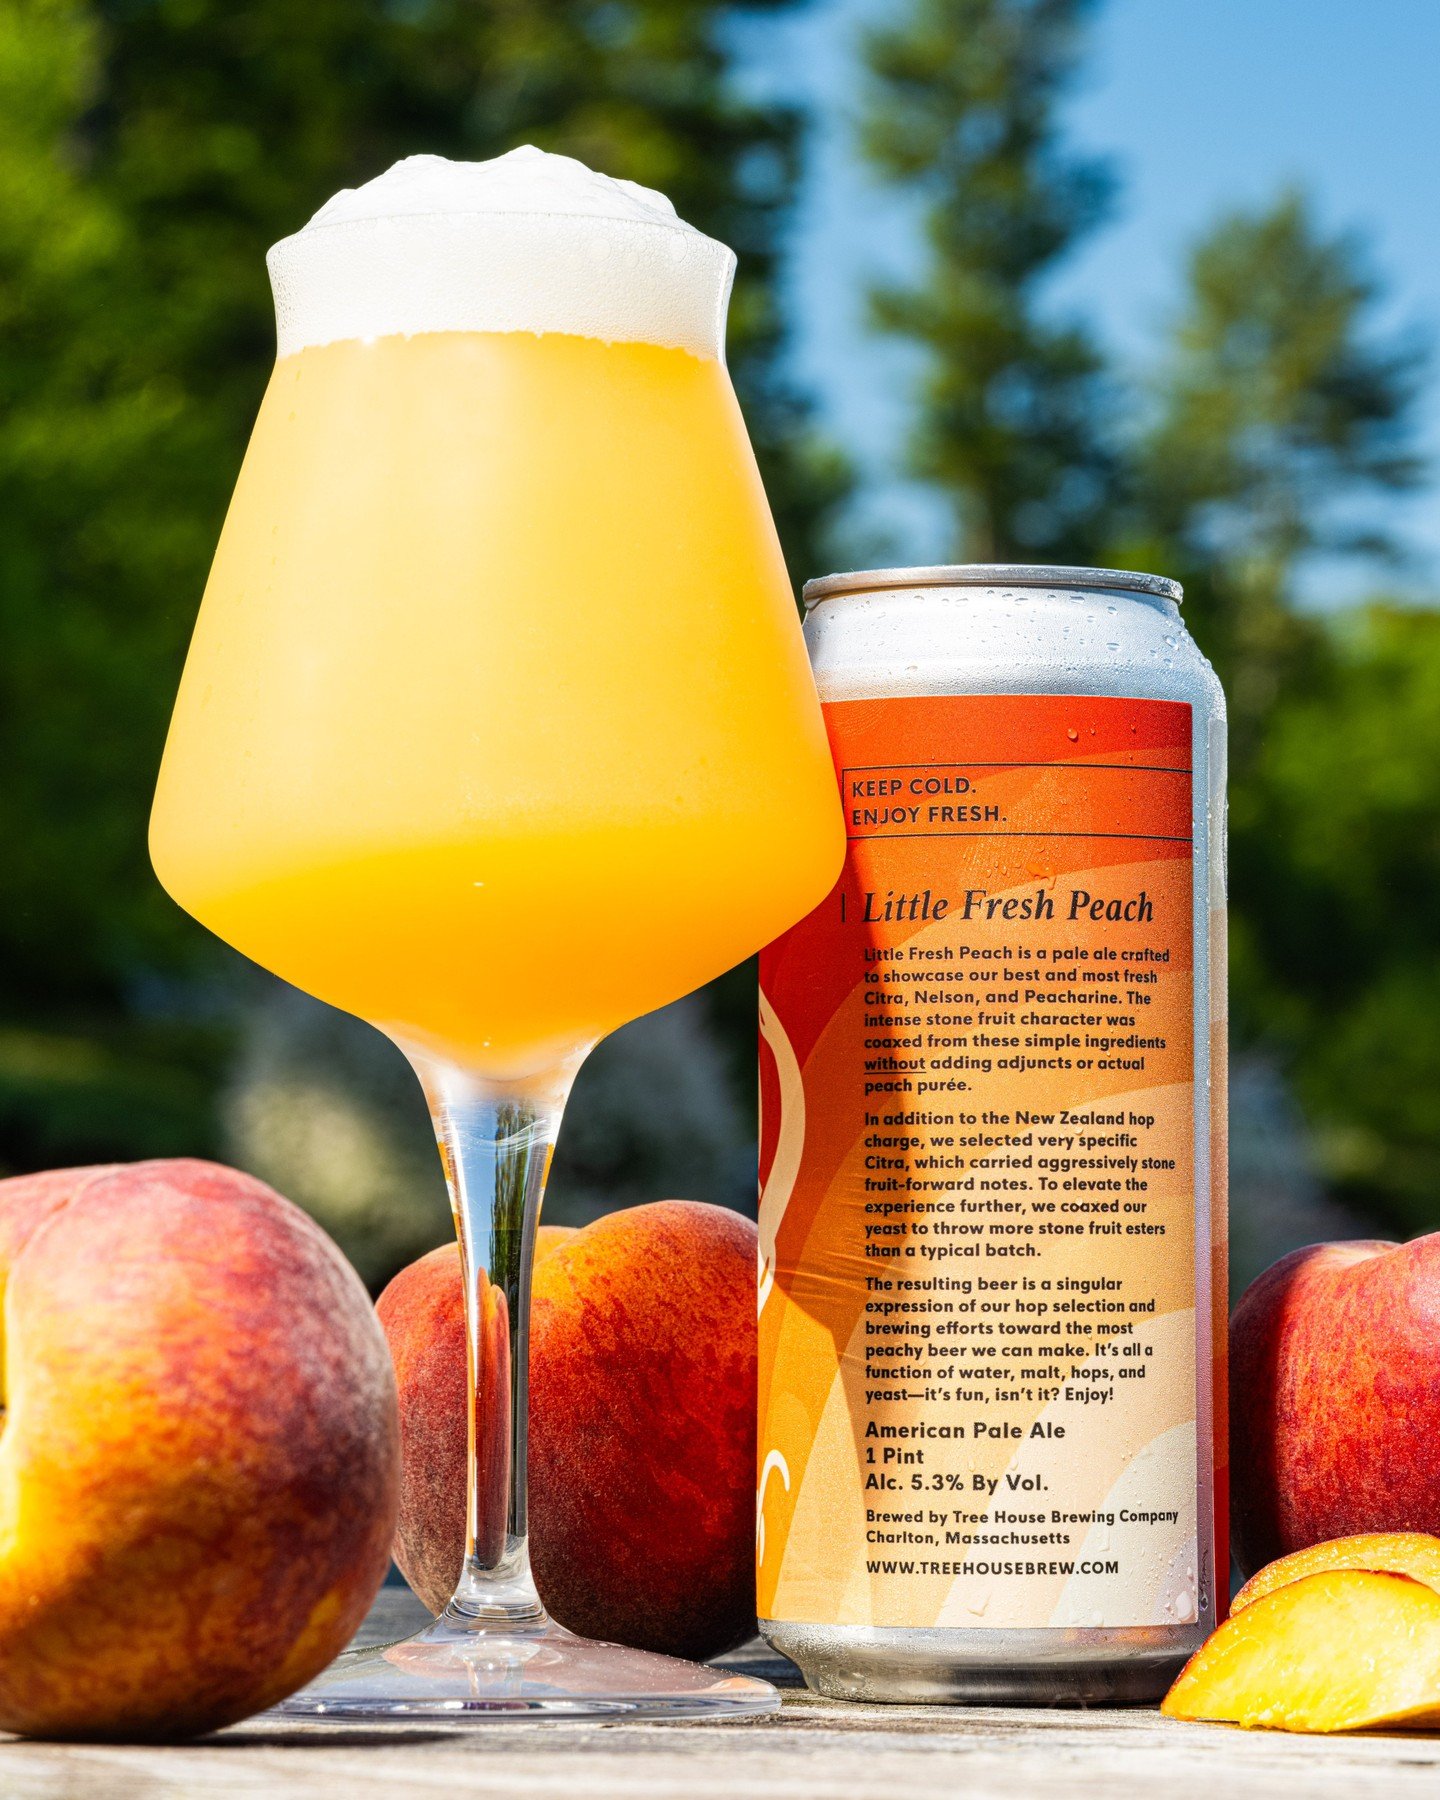 Little Fresh Peach showcases the magic of water, malt, hops, and yeast when artfully combined.

In addition to the New Zealand hop charge, we selected very specific Citra, which carried aggressively stone fruit-forward notes. To elevate the experienc